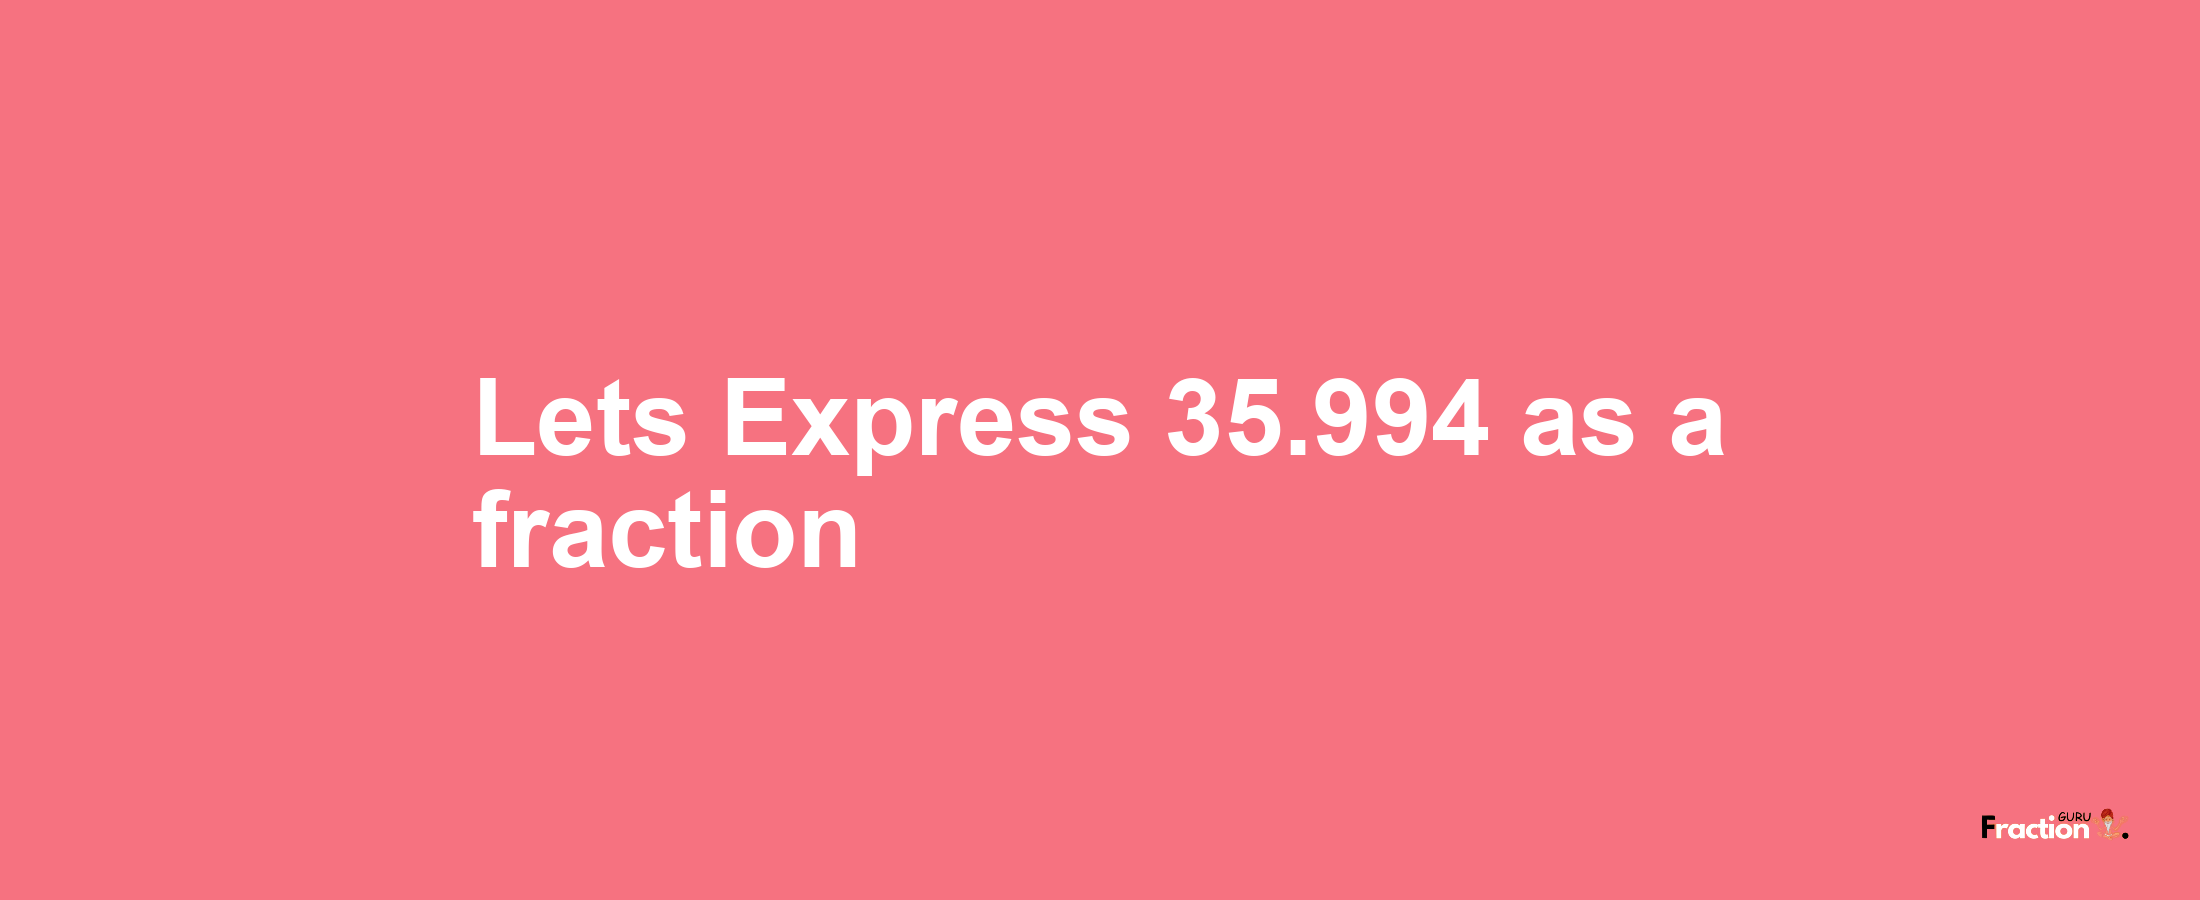 Lets Express 35.994 as afraction